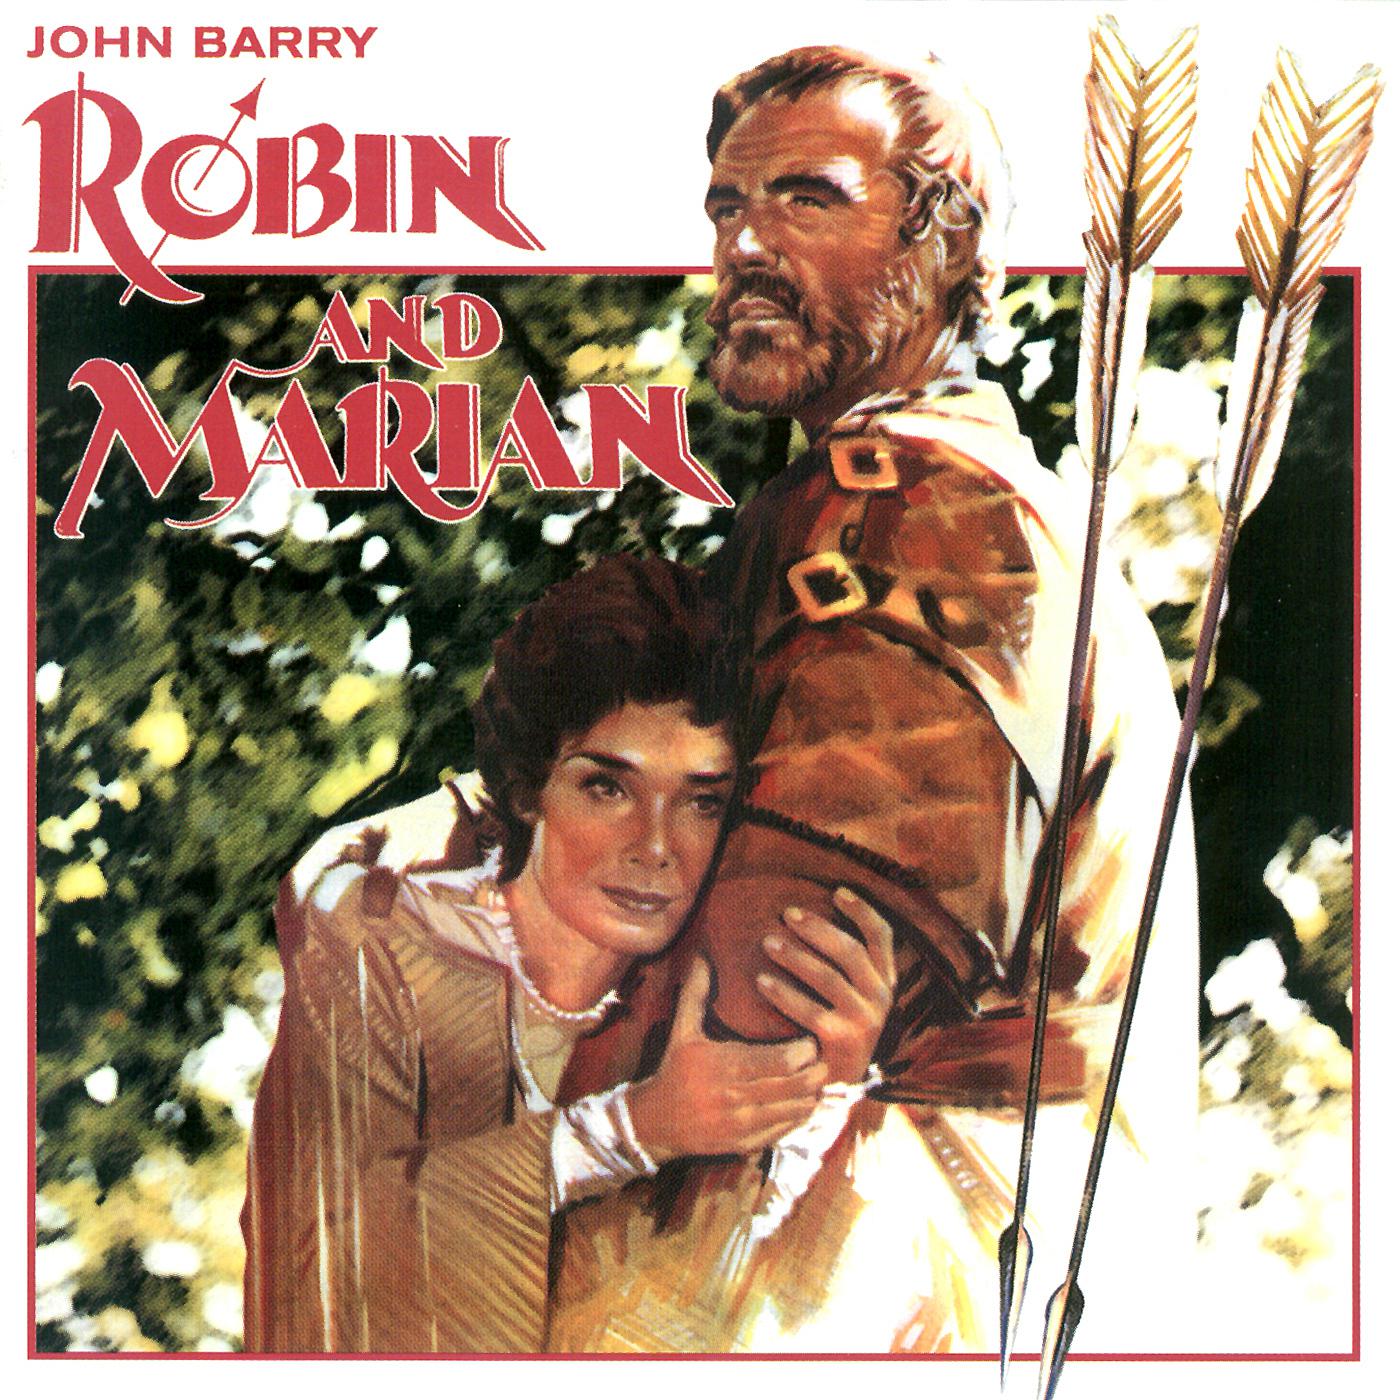 Robin and Marian / Fight and Recognition / "He Was My King" (From "Robin and Marian")